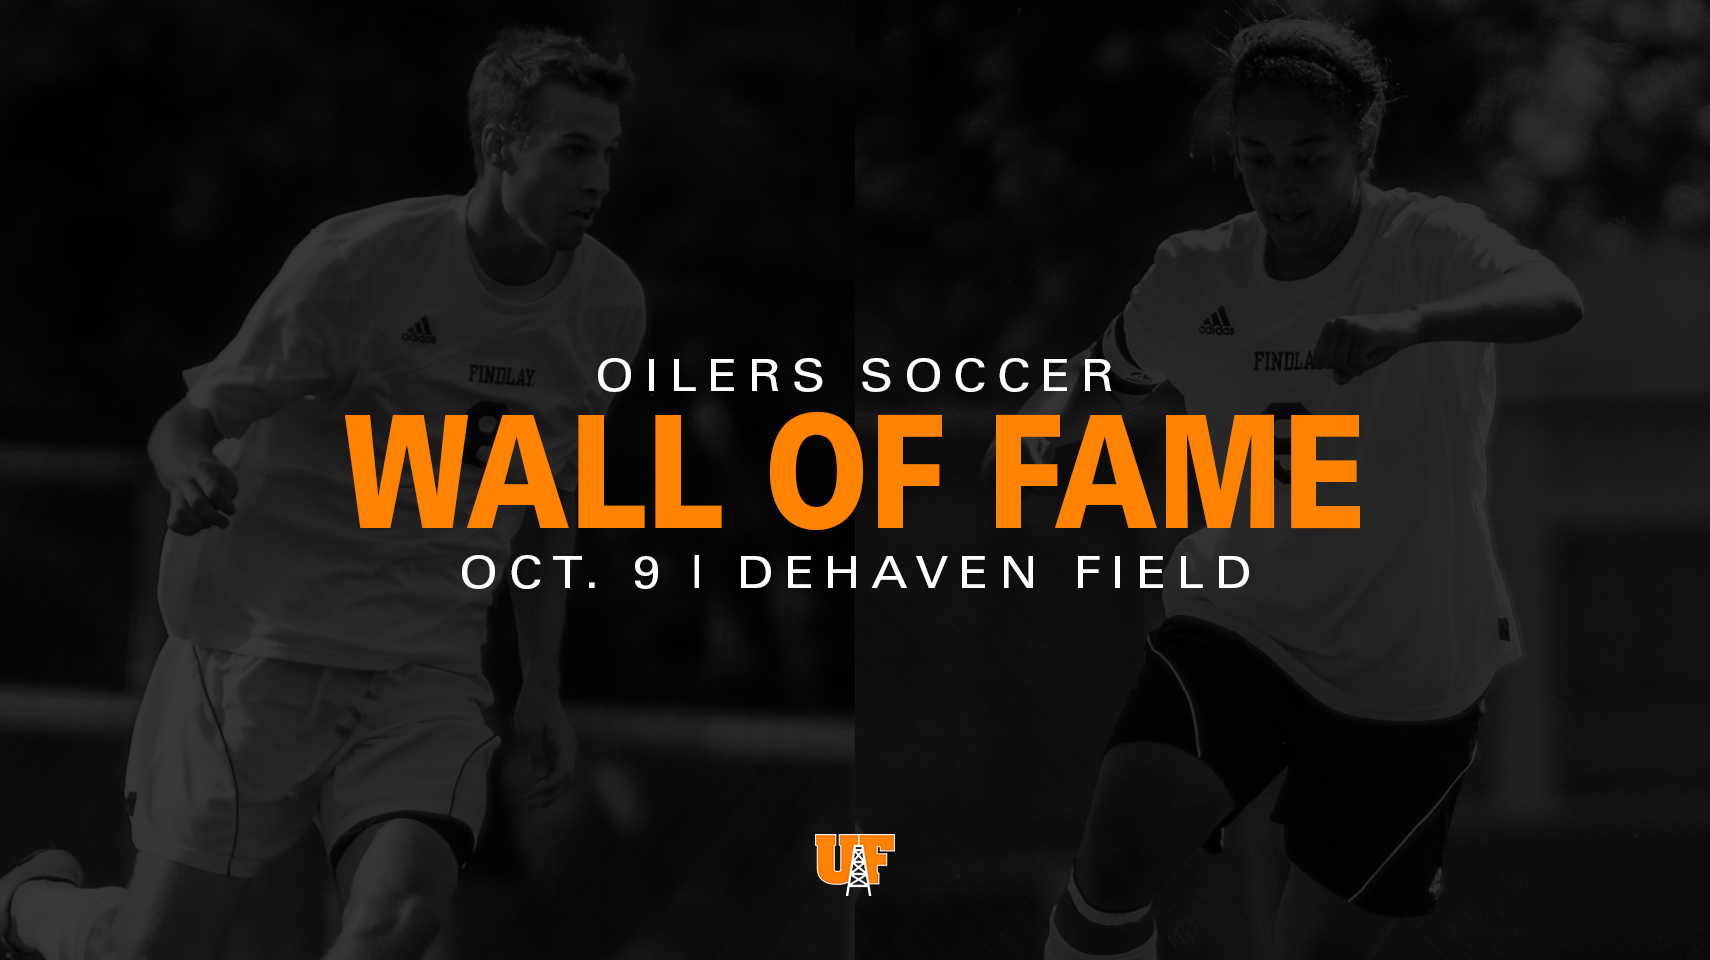 Soccer Wall of Fame on Oct. 9